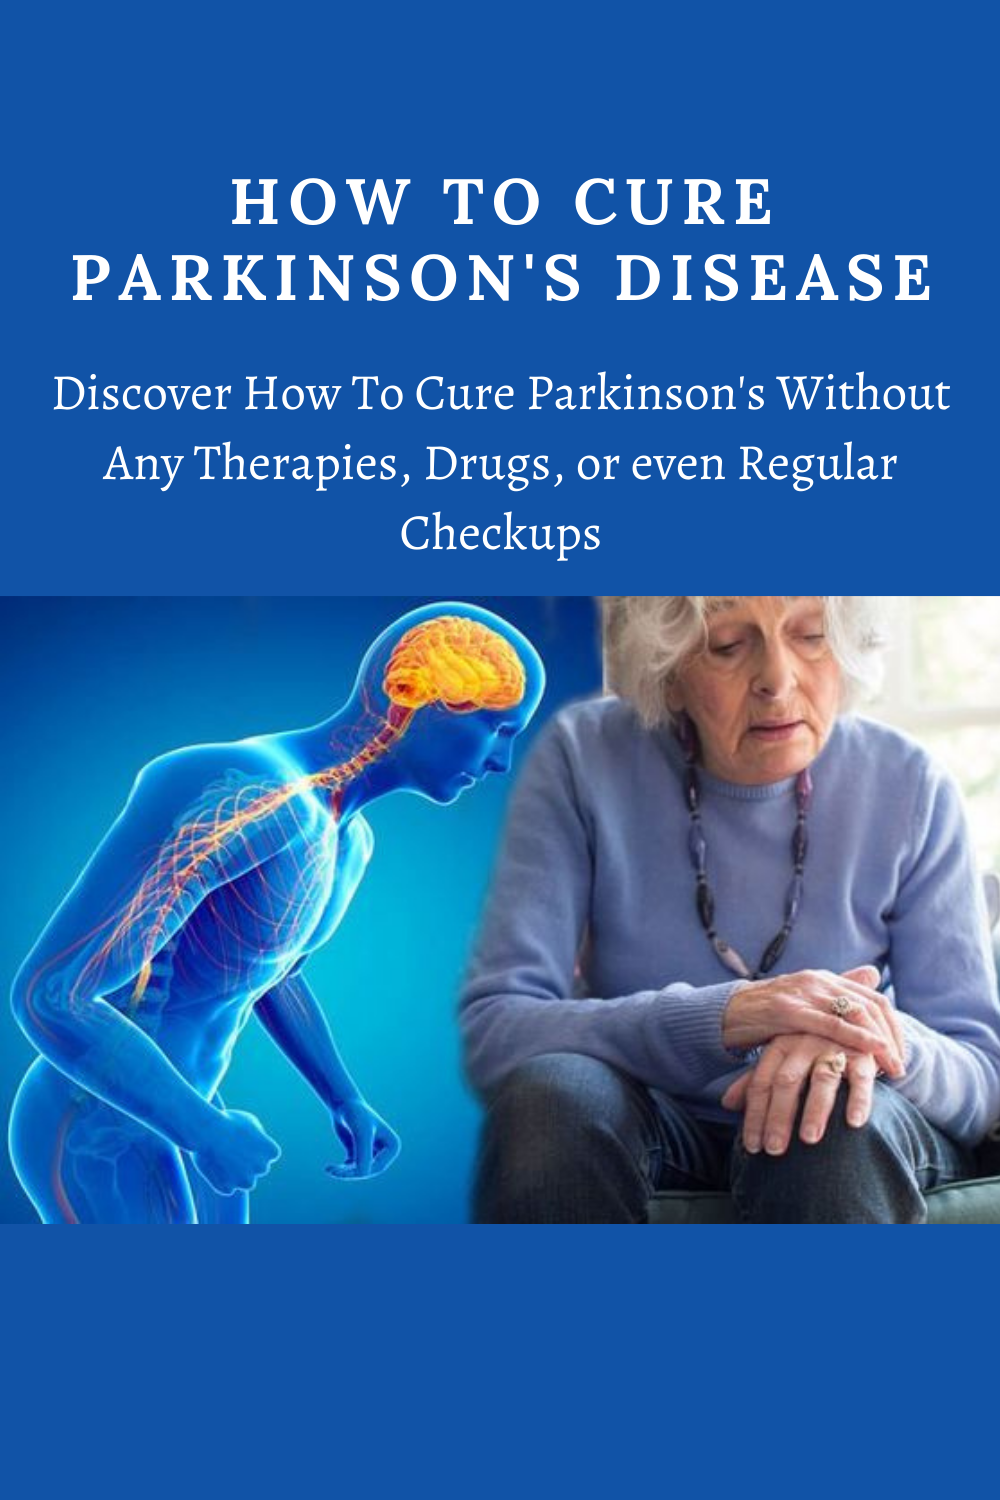 How To Prevent Parkinsons Disease